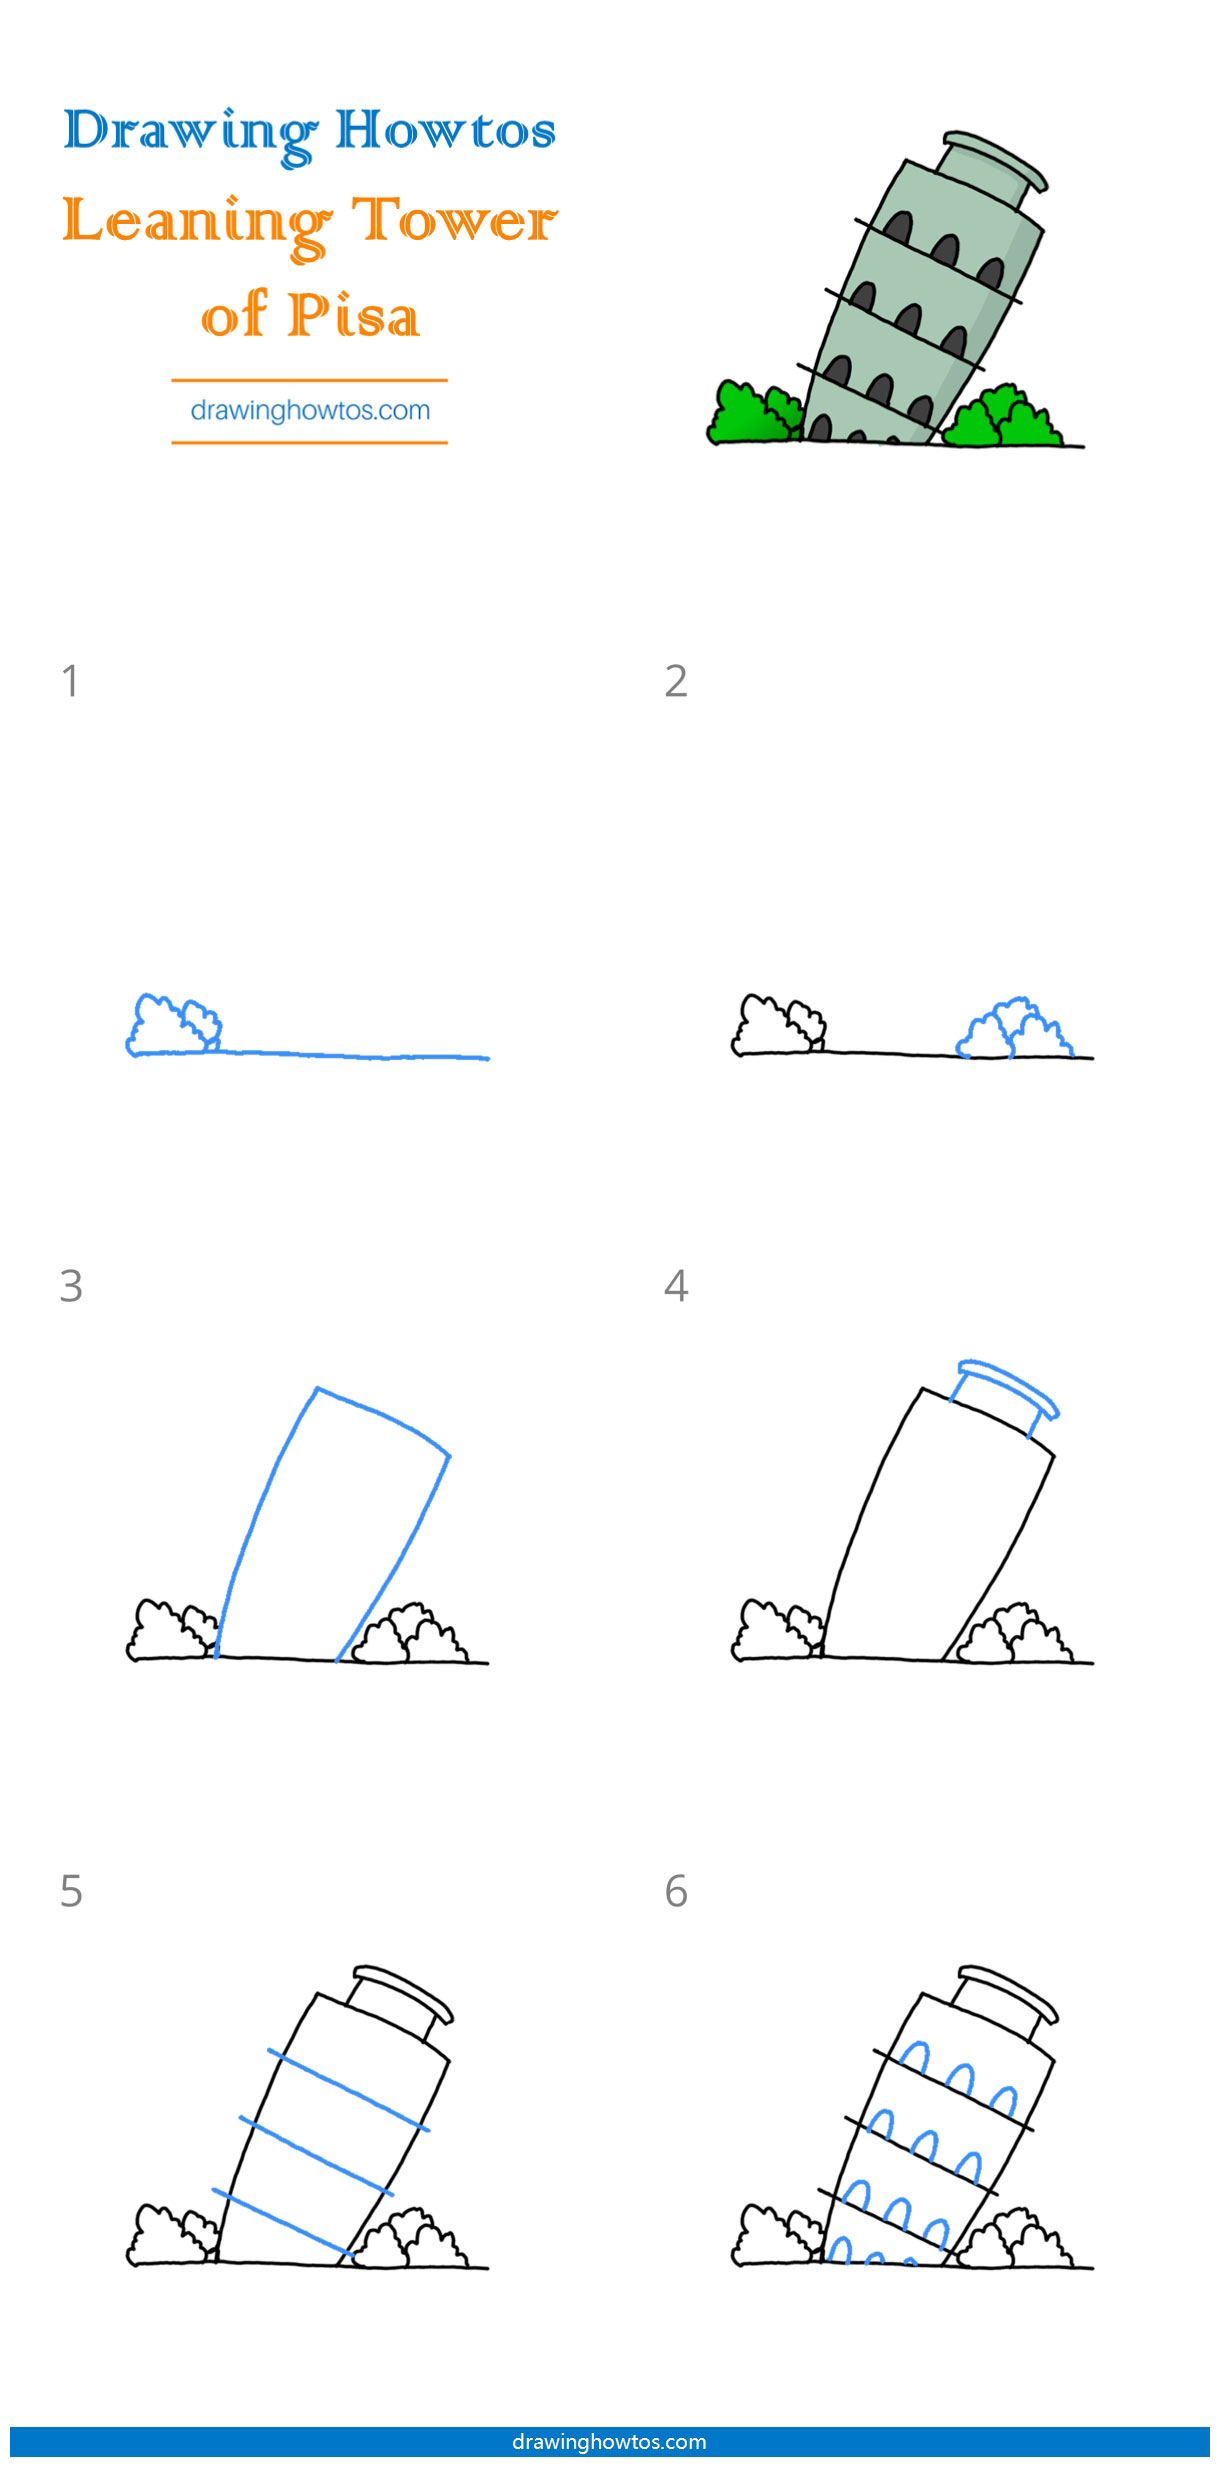 How to Draw the Leaning Tower of Pisa - Step by Step Easy Drawing